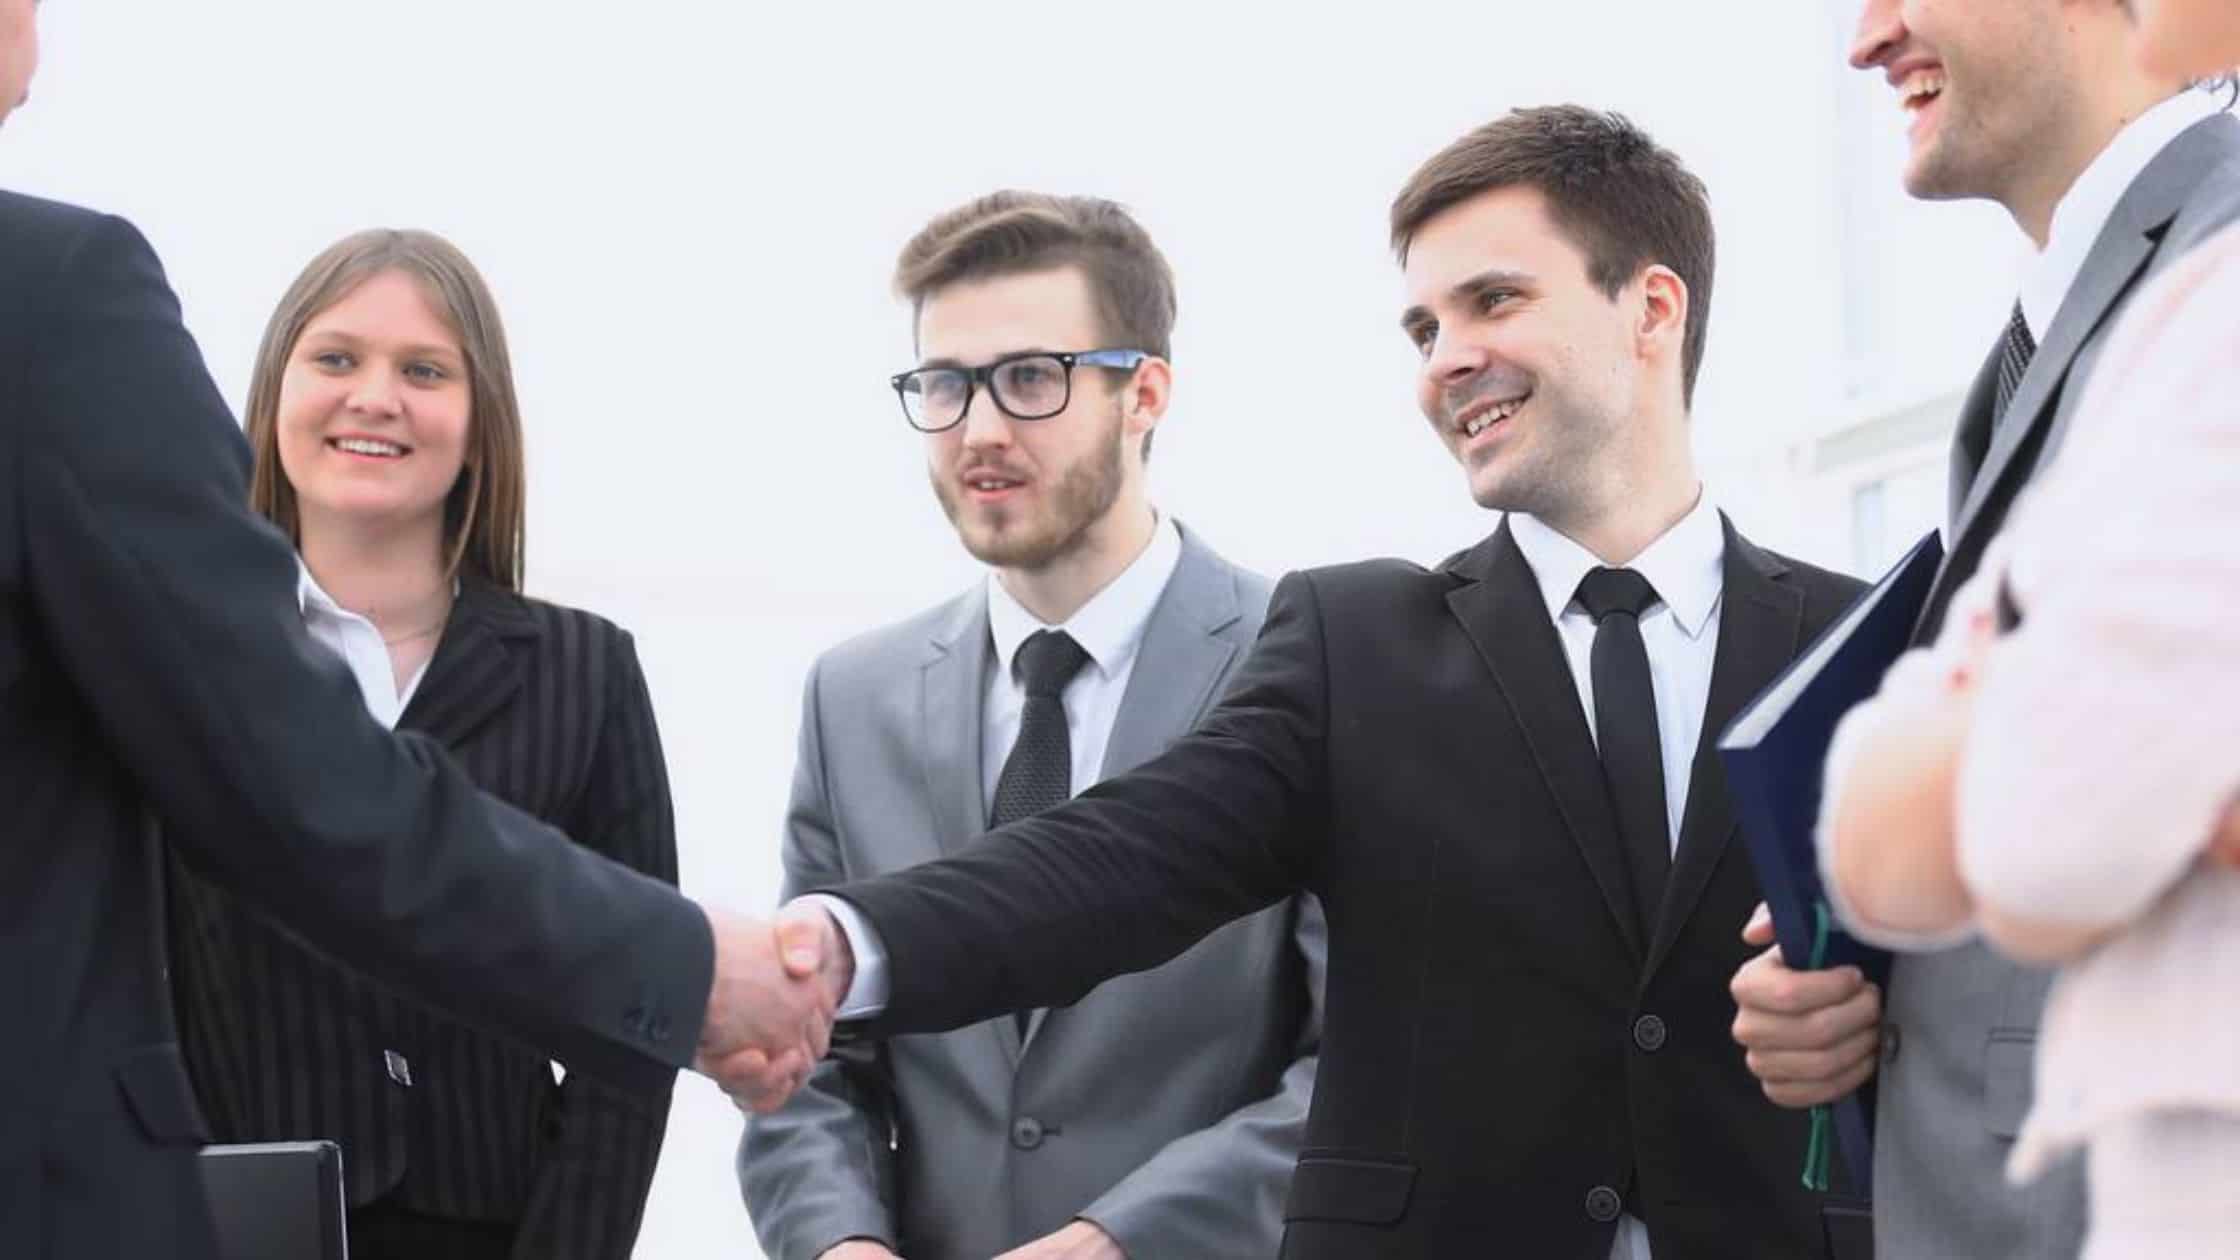 The Crucial Role Of Career Networking In Professional Growth